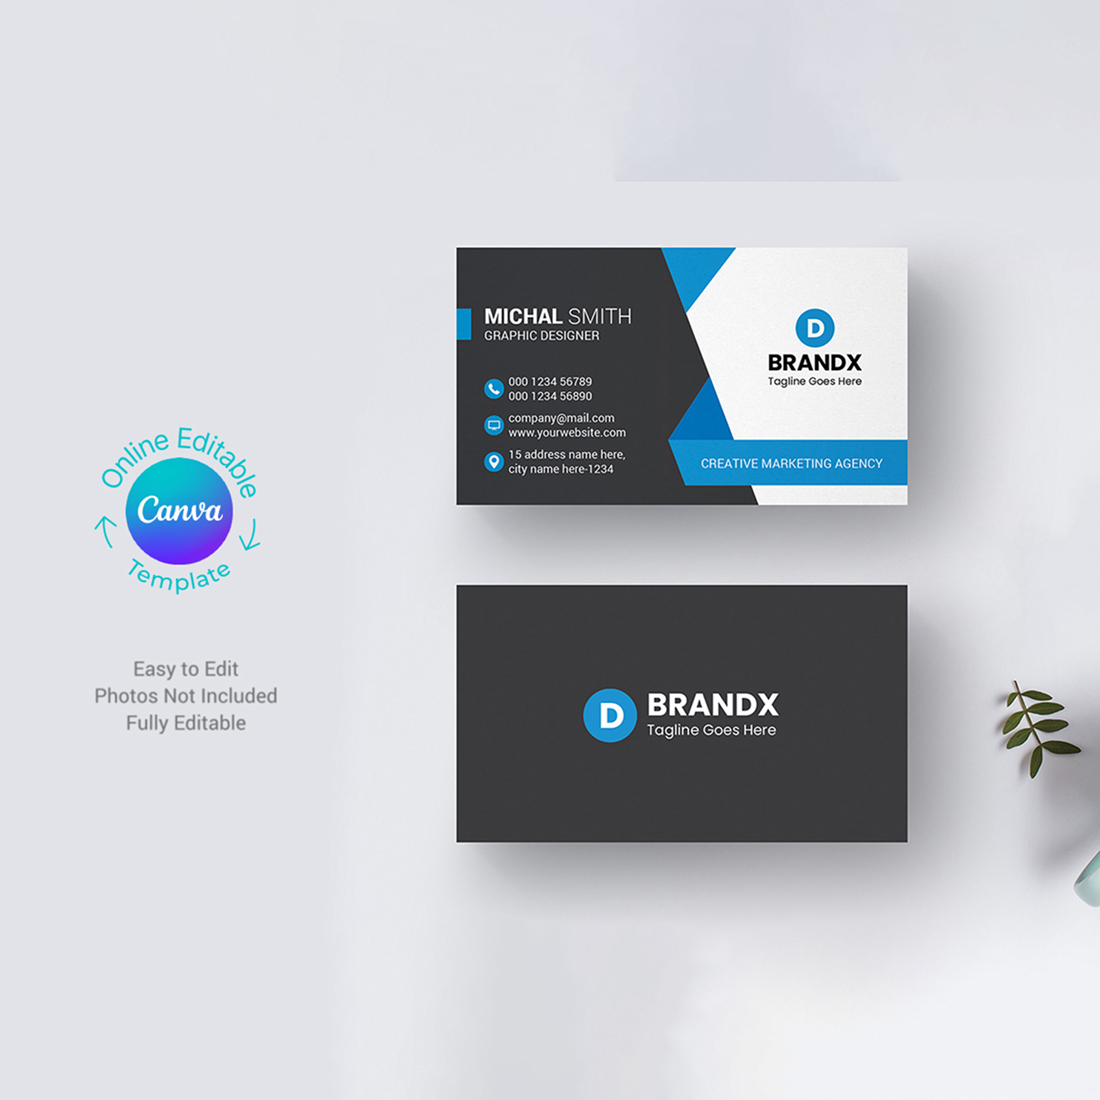 Business Card Design Canva Template cover image.